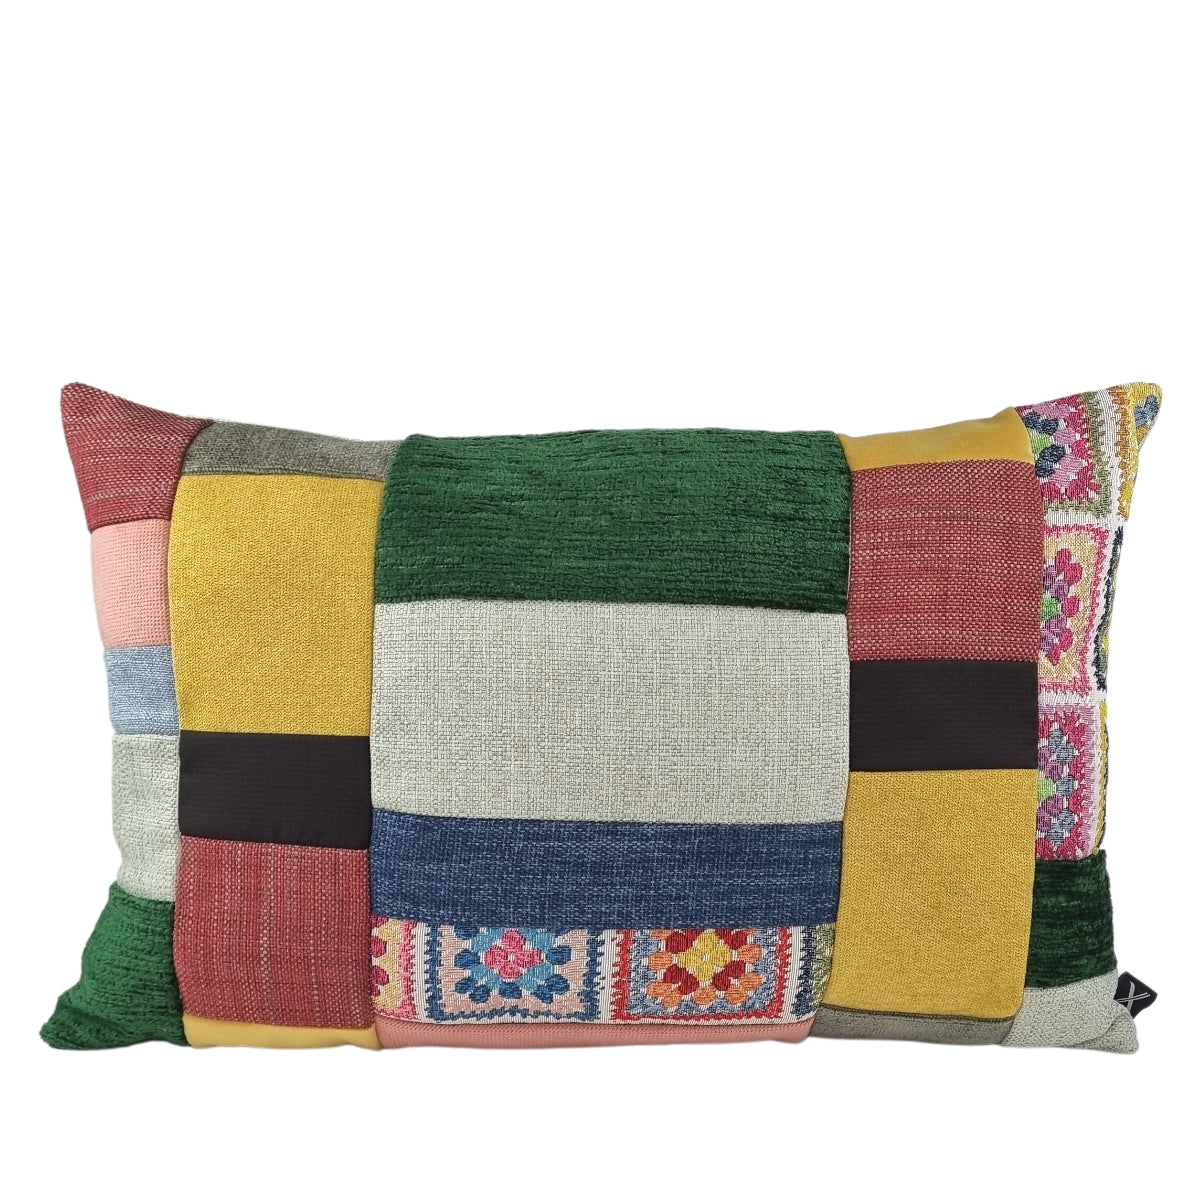 KULURI Cushion 40x60 Combined with colored fabrics and Beige back